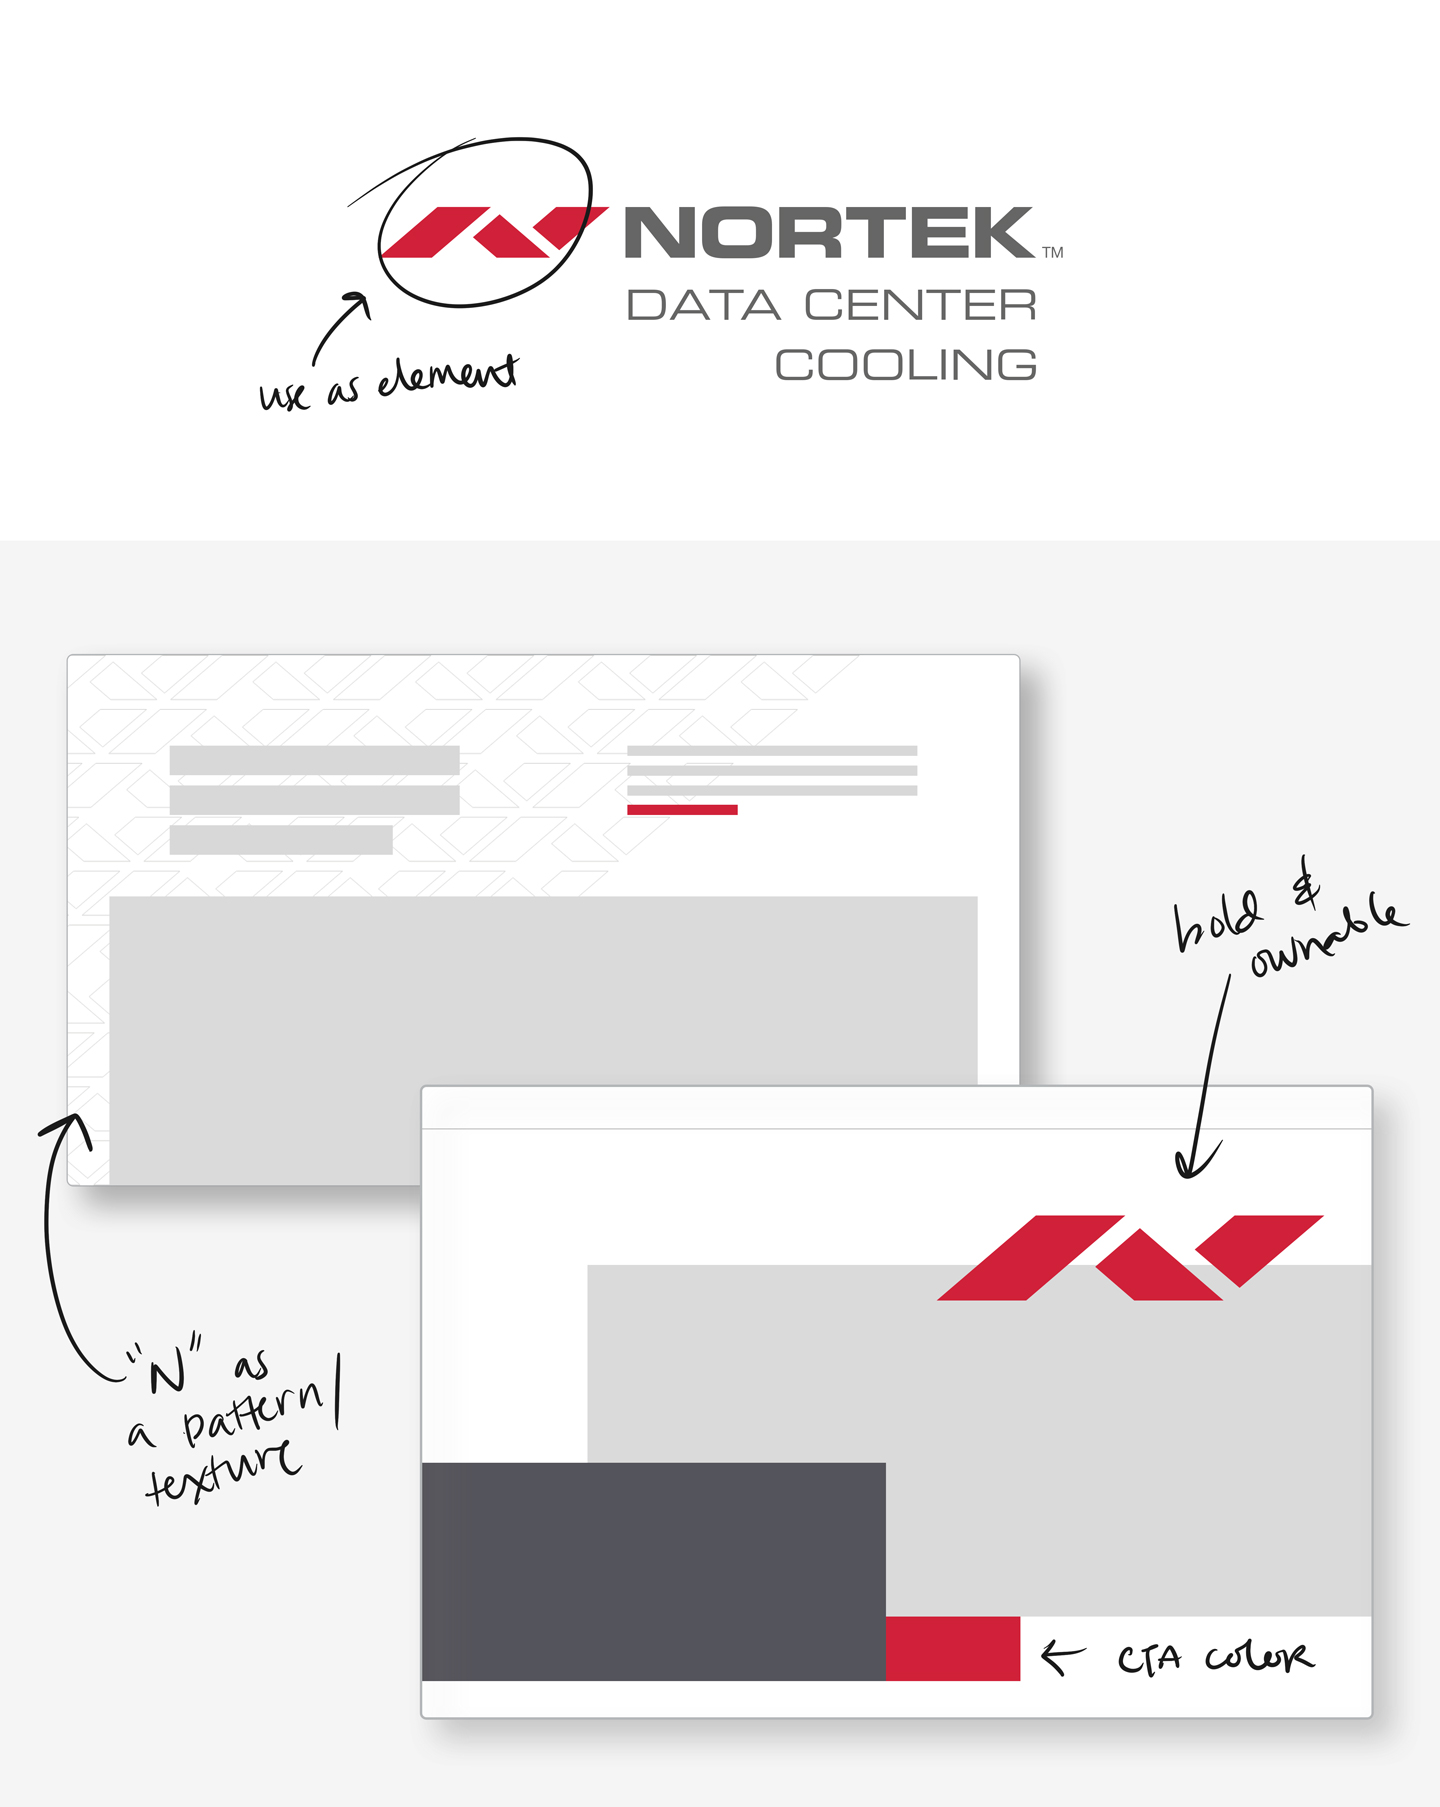 Sketches showing the use of the Nortek brandmark N in different usage on the website